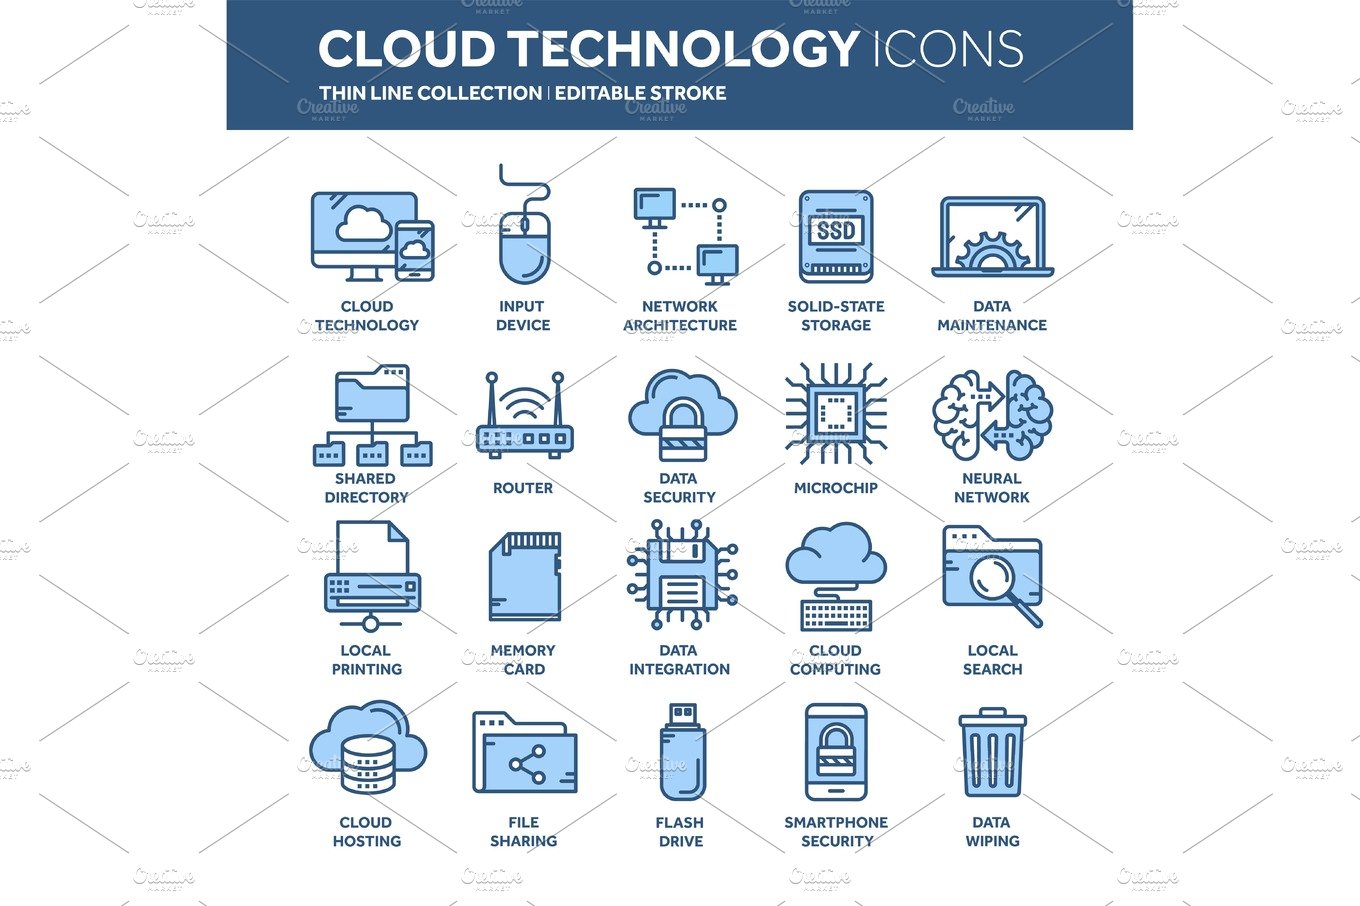 Cloud omputing. Internet technology. Online services. Data, information sec... cover image.